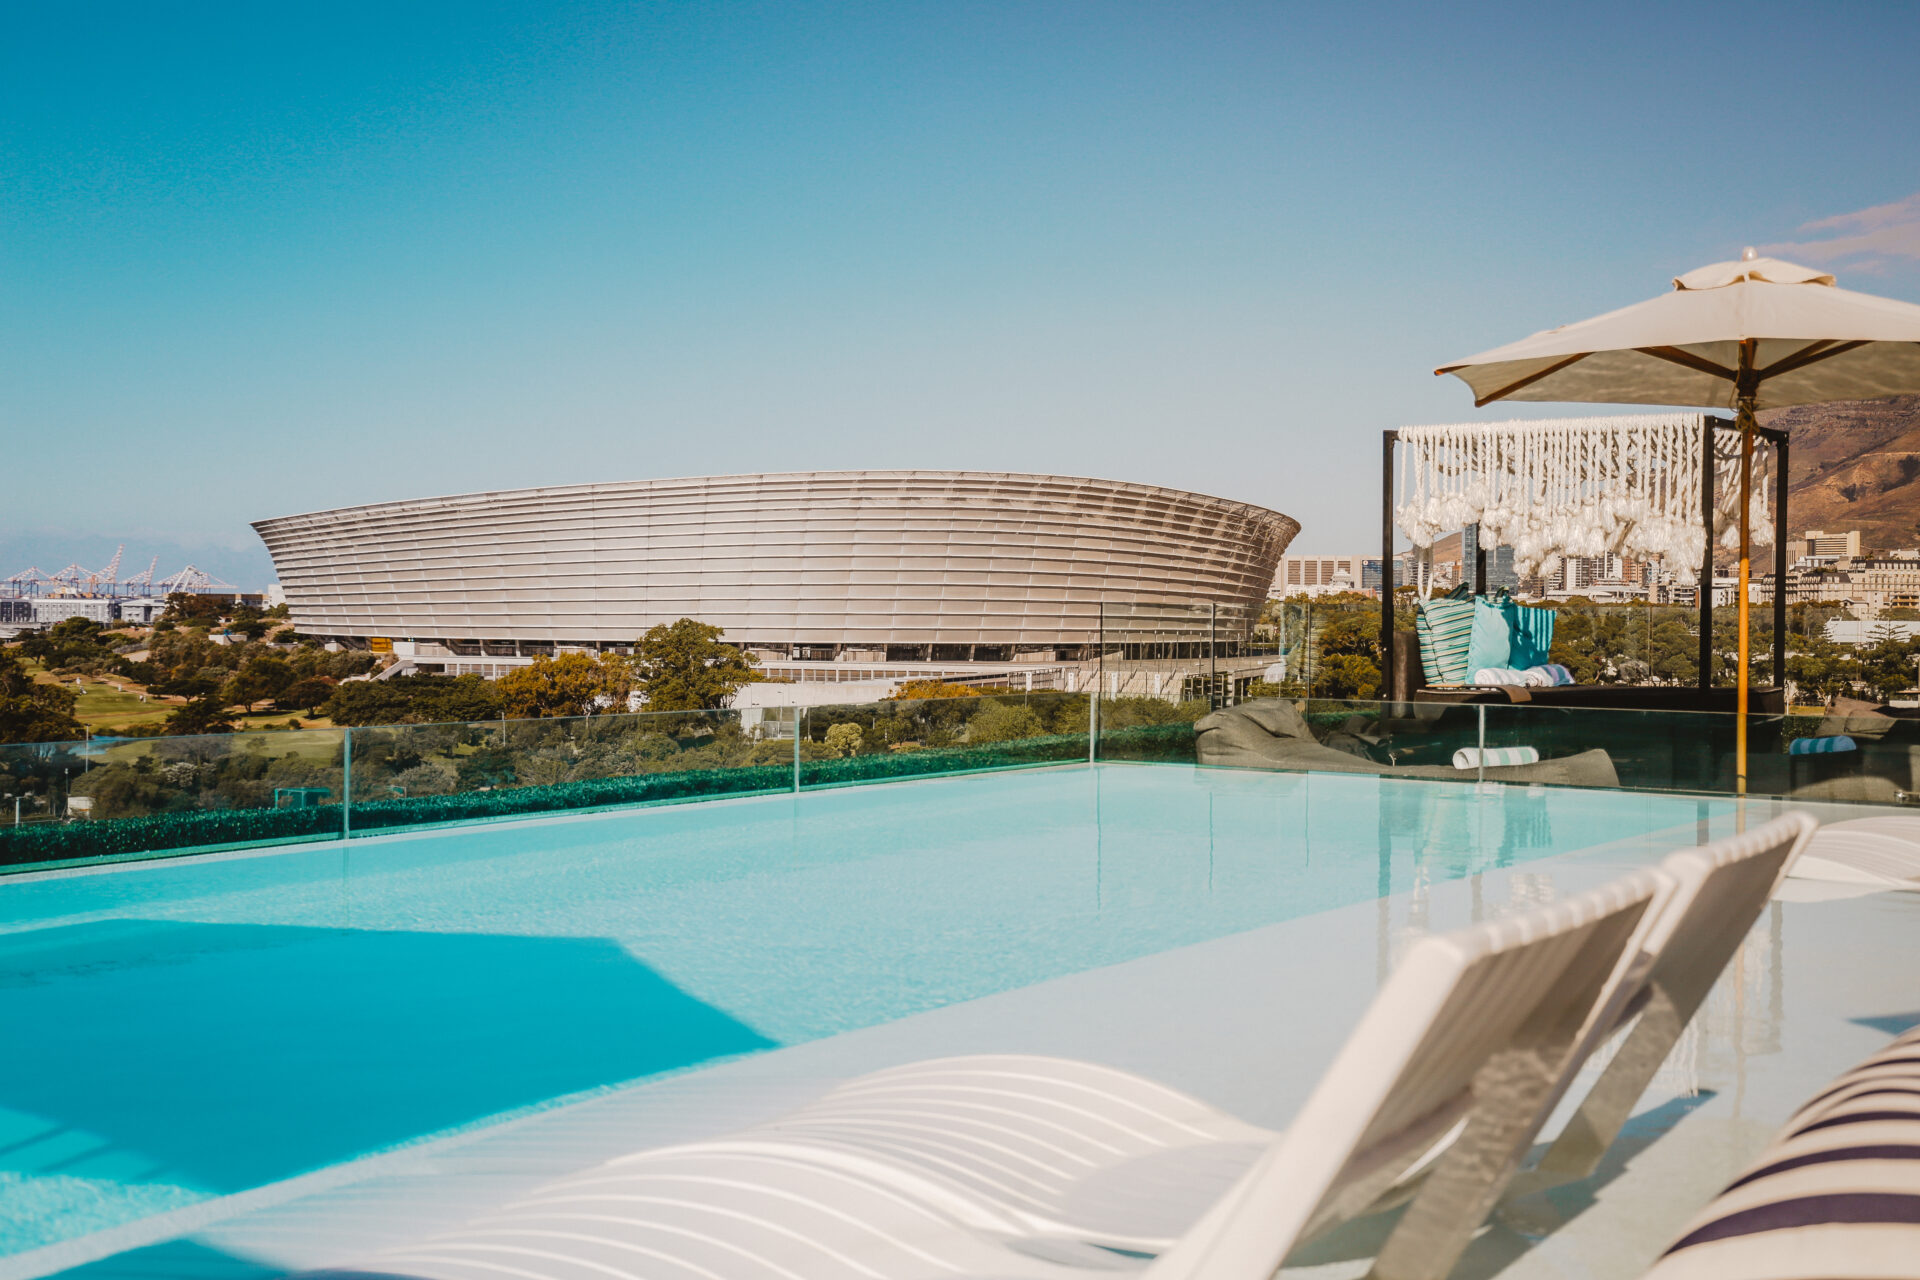 A view of the Greenpoint Stadium on a sunny day from a balcony with a long, clear blue pool, lounging chairs and an umbrella